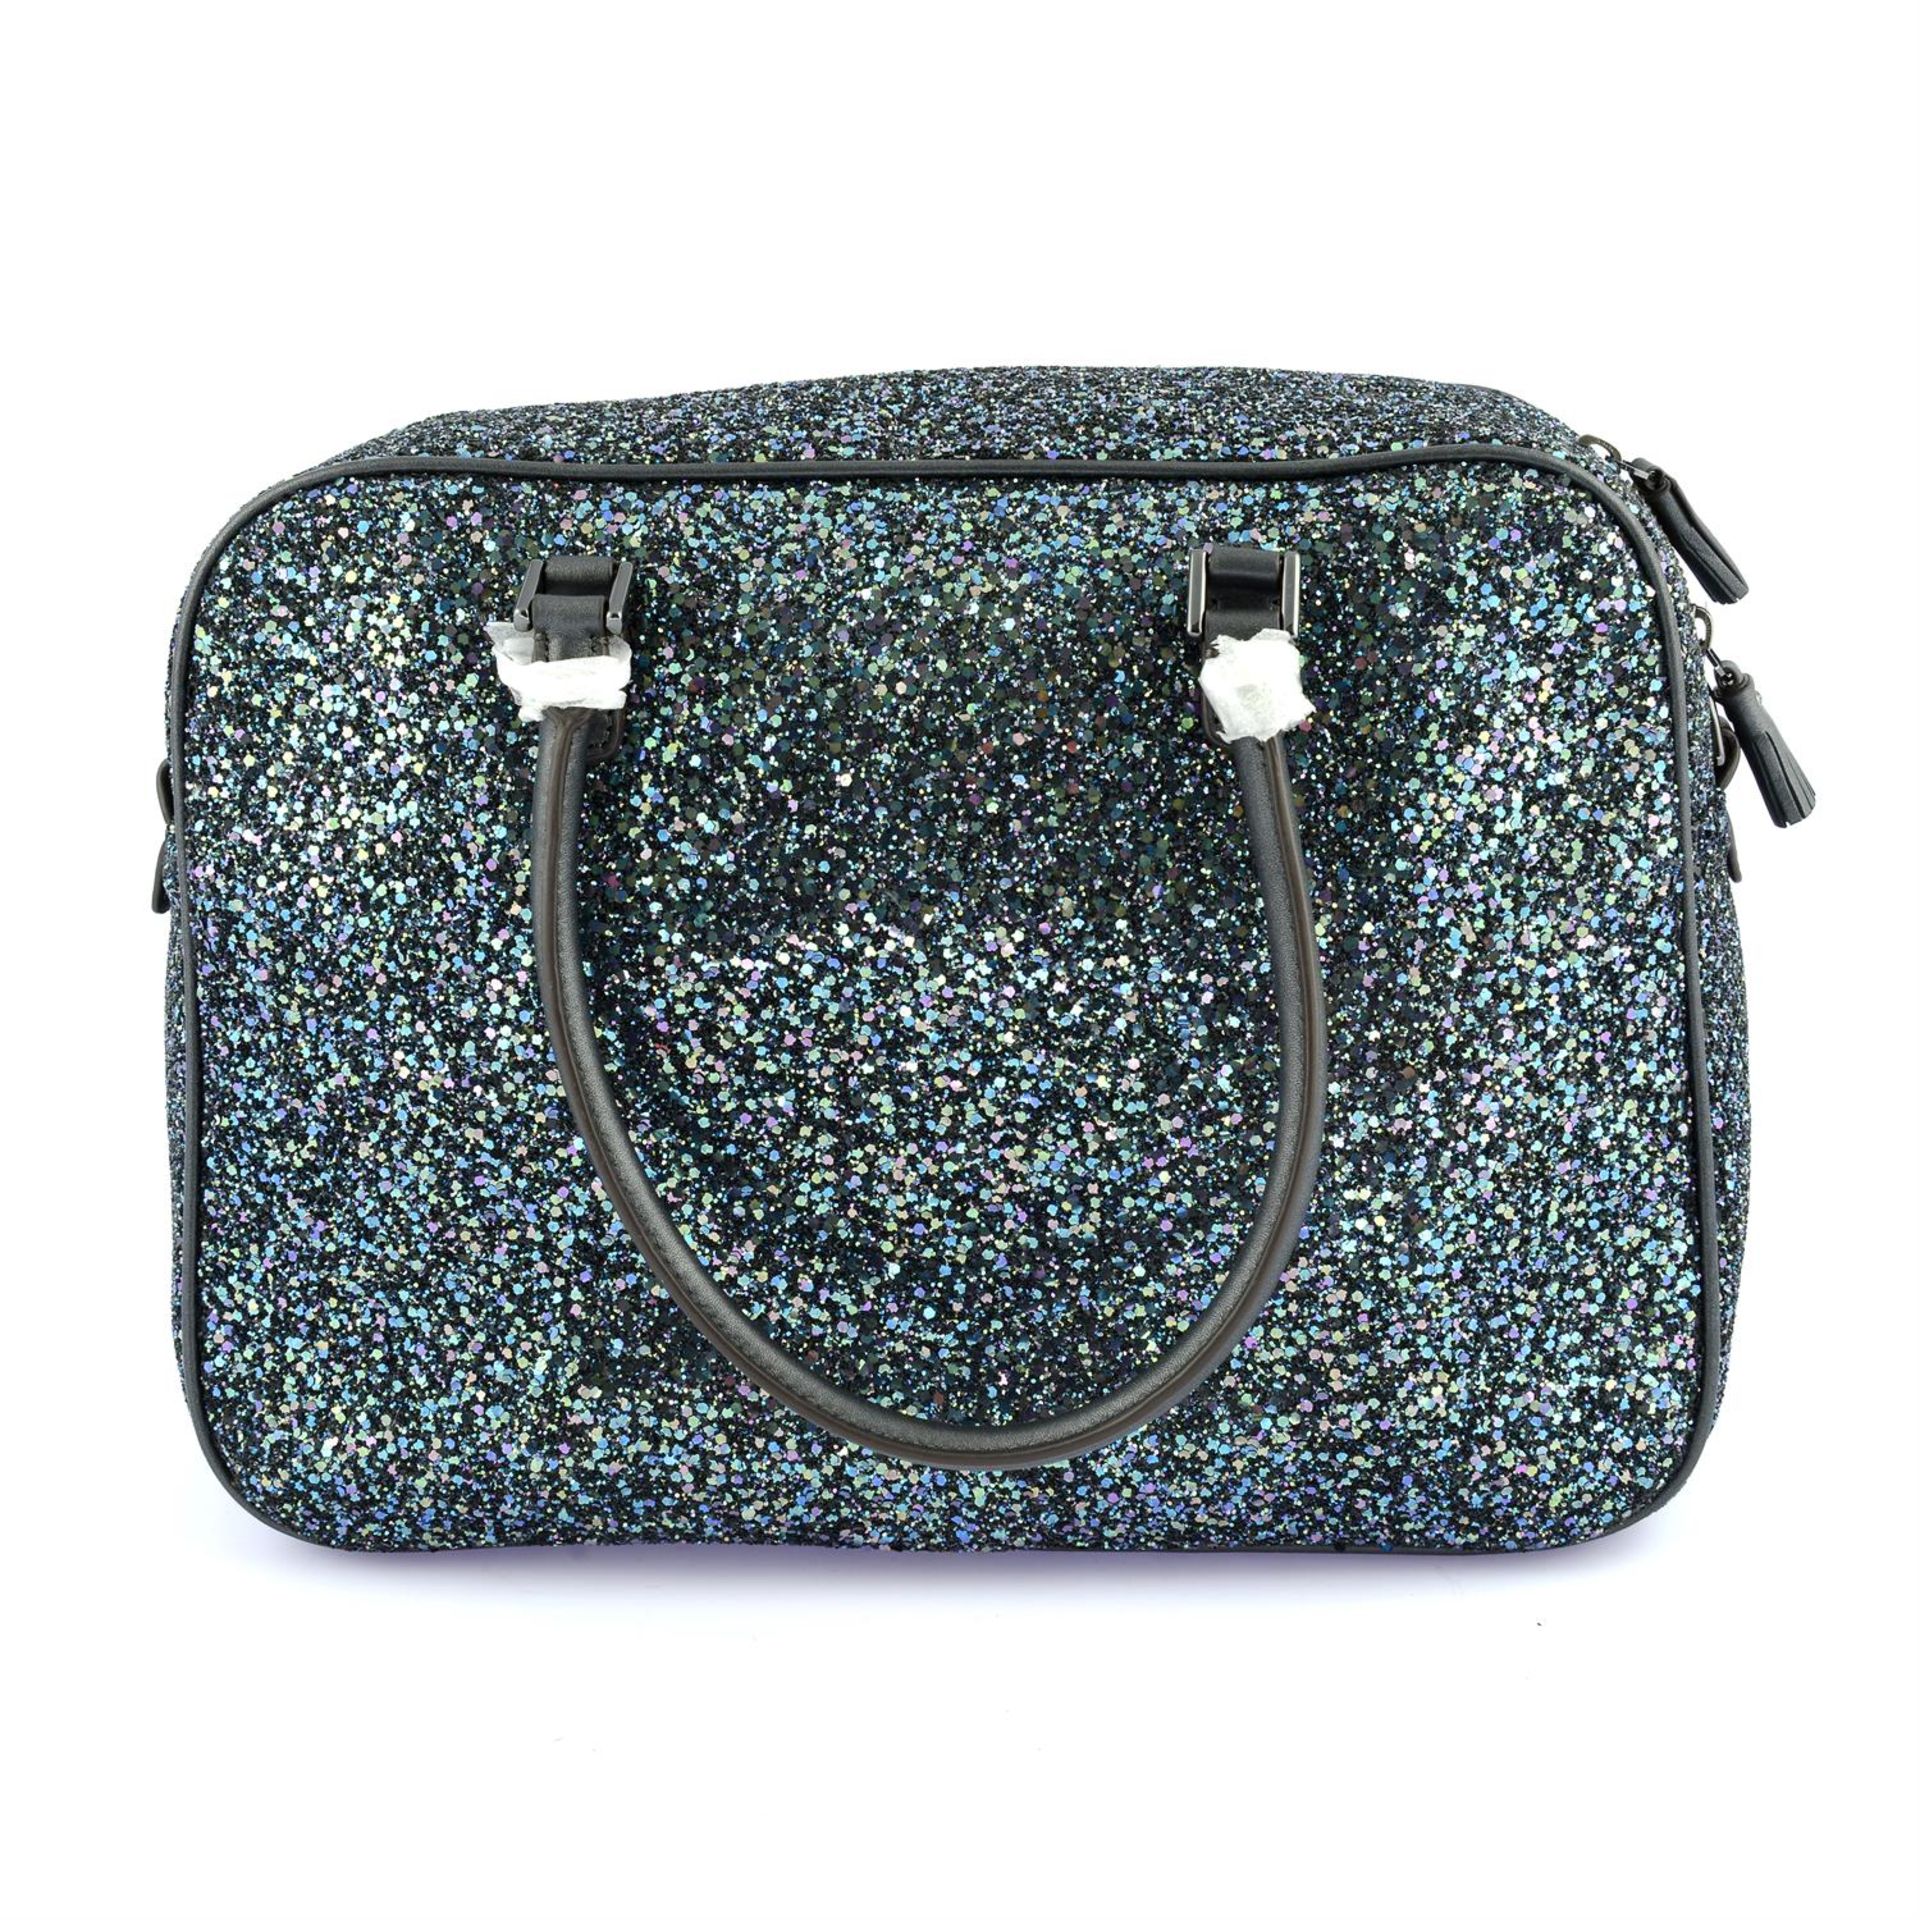 ANYA HINDMARCH -a glitter and black leather Boston bag. - Image 2 of 6